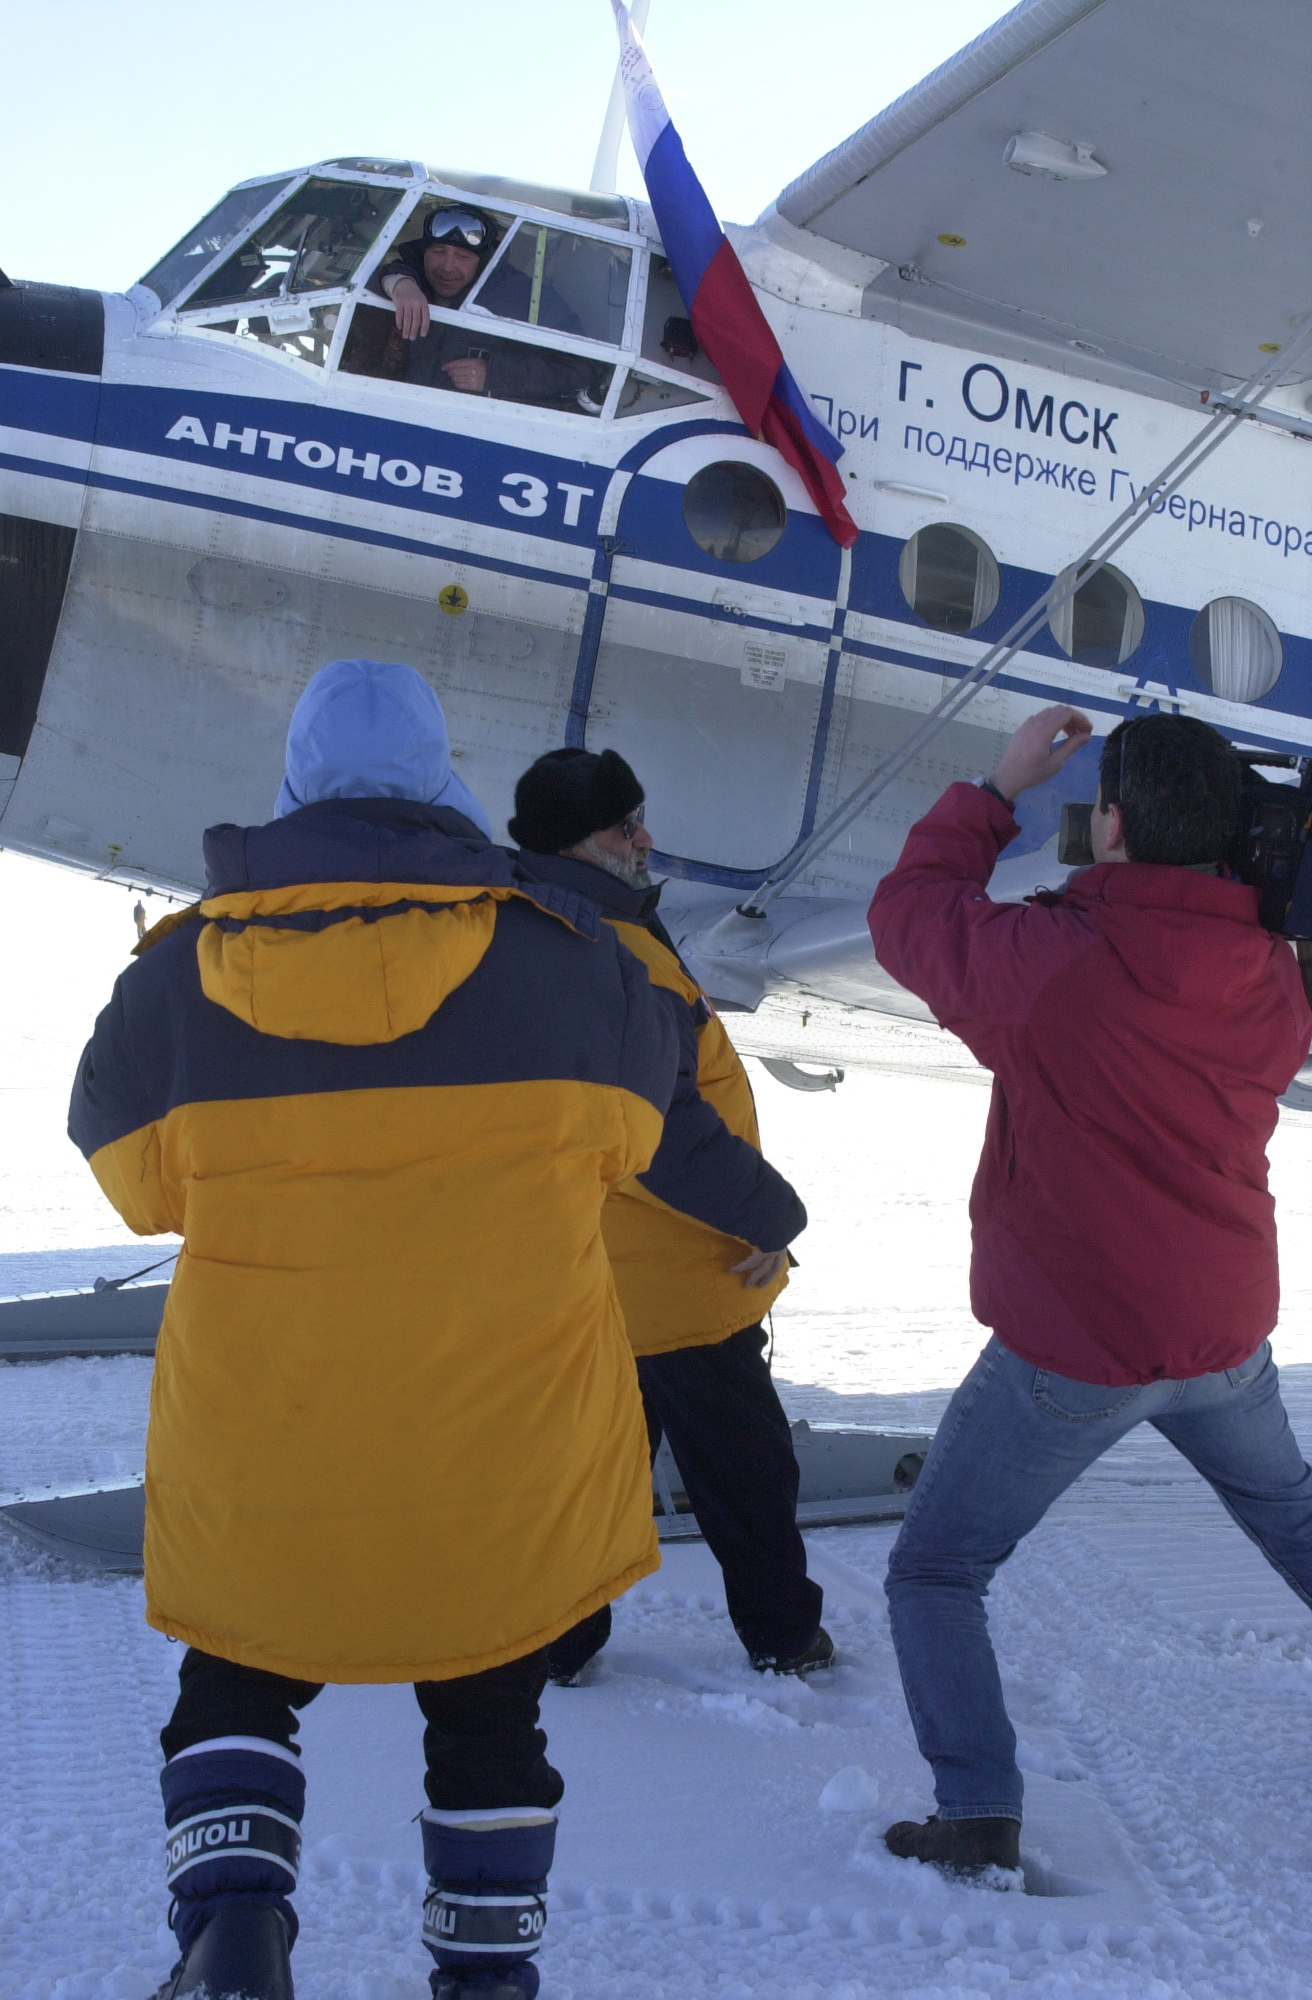 Three people look up at the pilot of a small airplane that is sitting on the ground. 